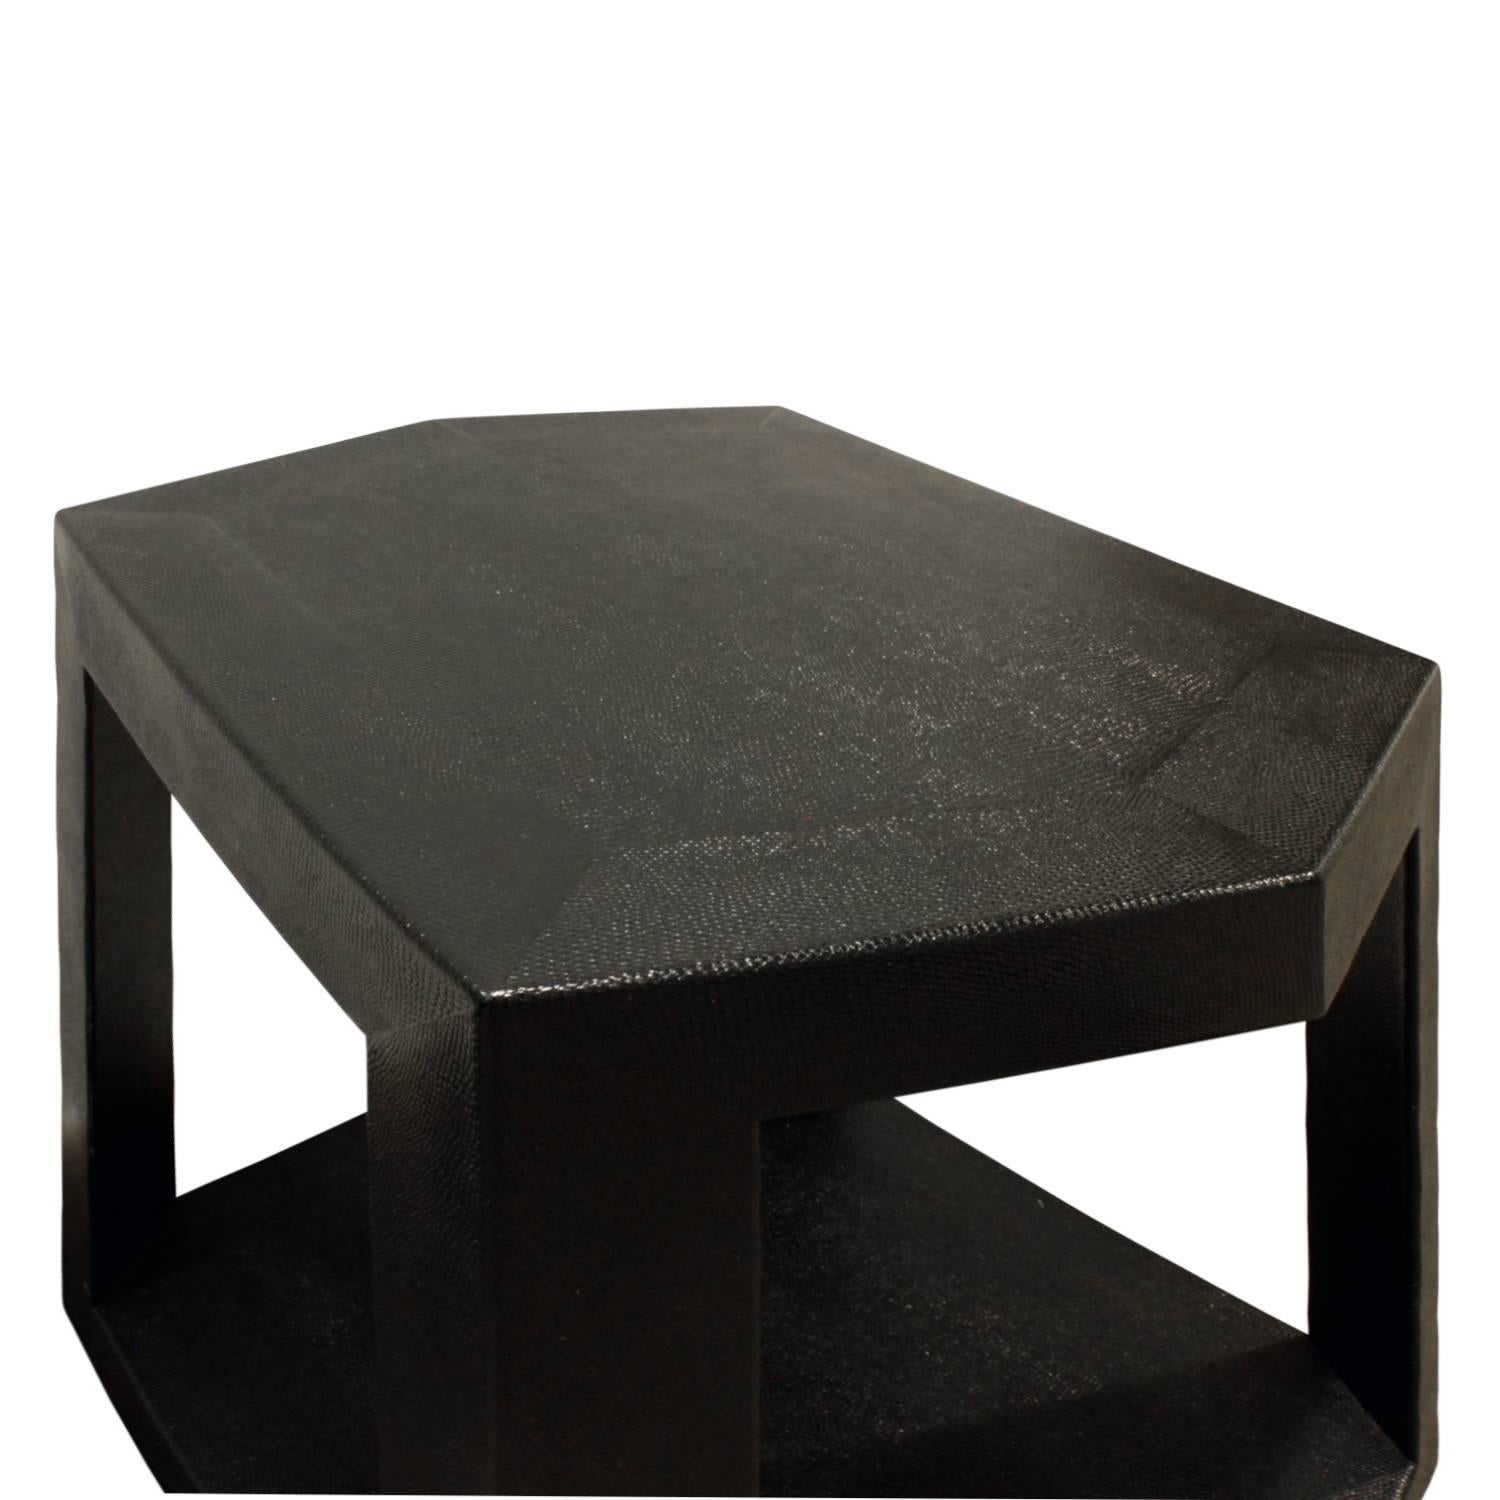 Hand-Crafted Karl Springer Hexagonal Side Table in Embossed Reptile, 1986 Signed